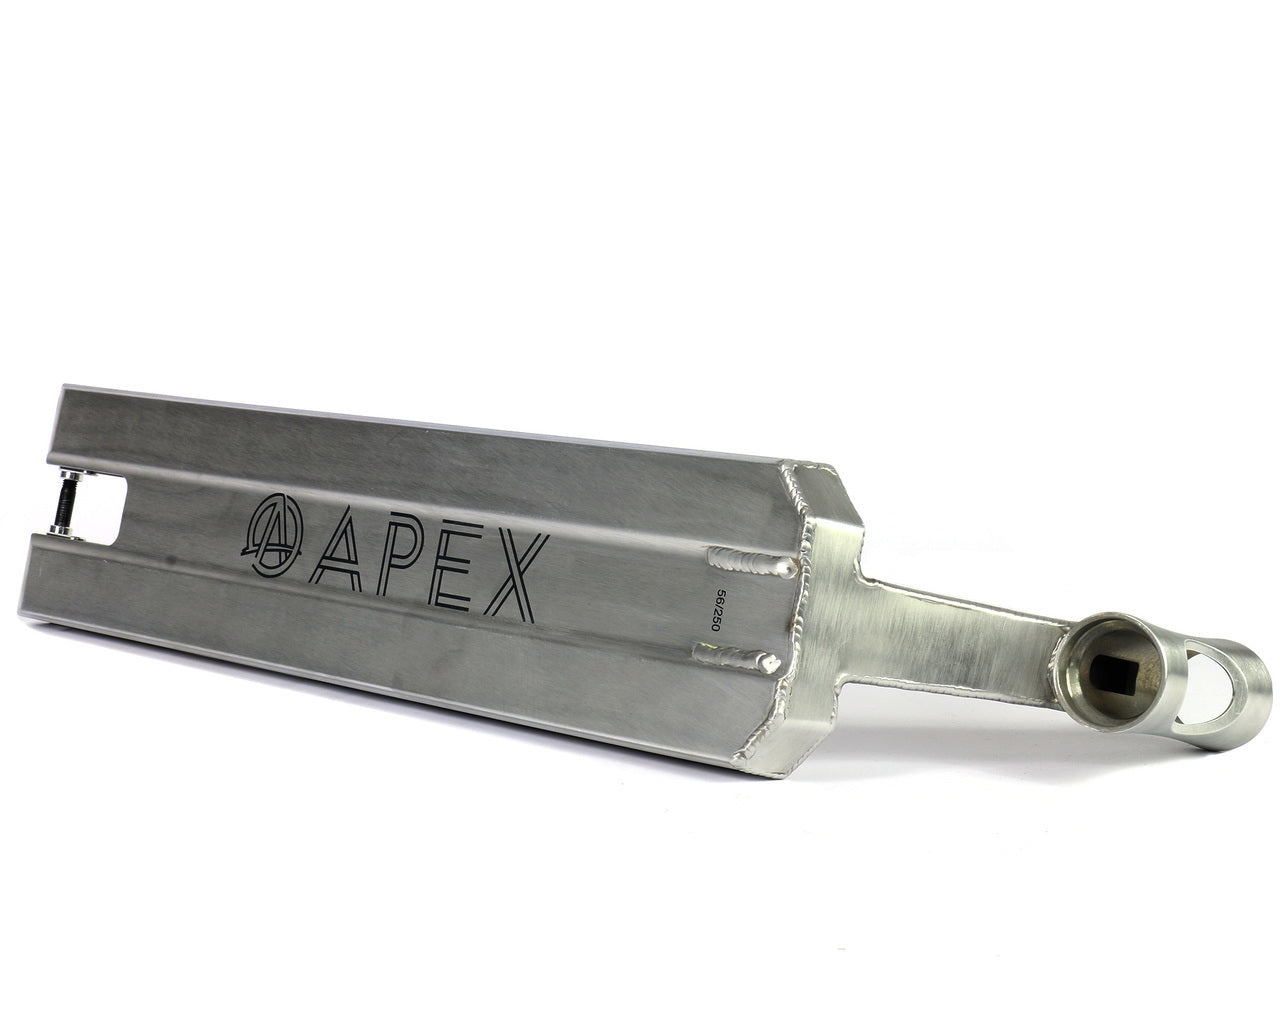 Apex Pro Raw Silver Boxed Stunt Scooter Deck - 5" x 20.1" - Base